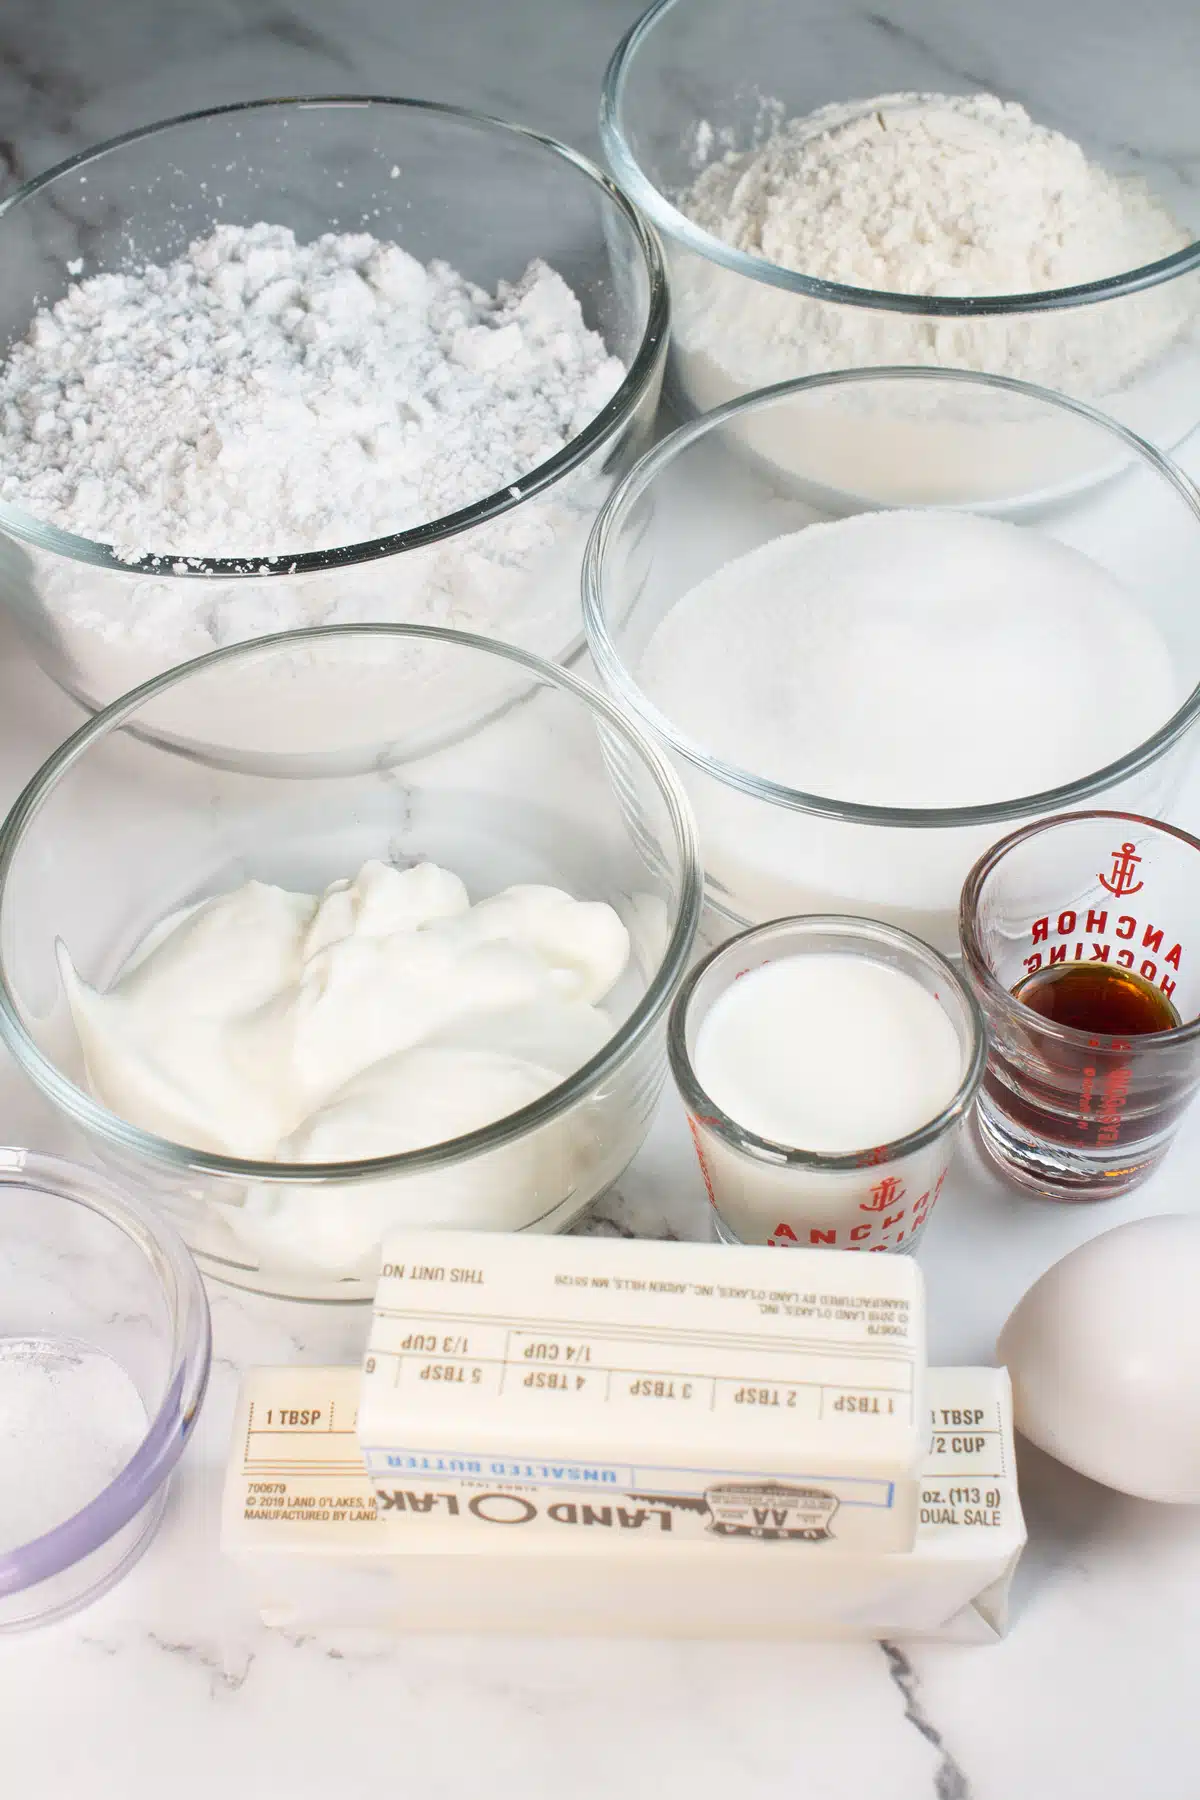 Tall image showing ingredients needed for sour cream cookies.